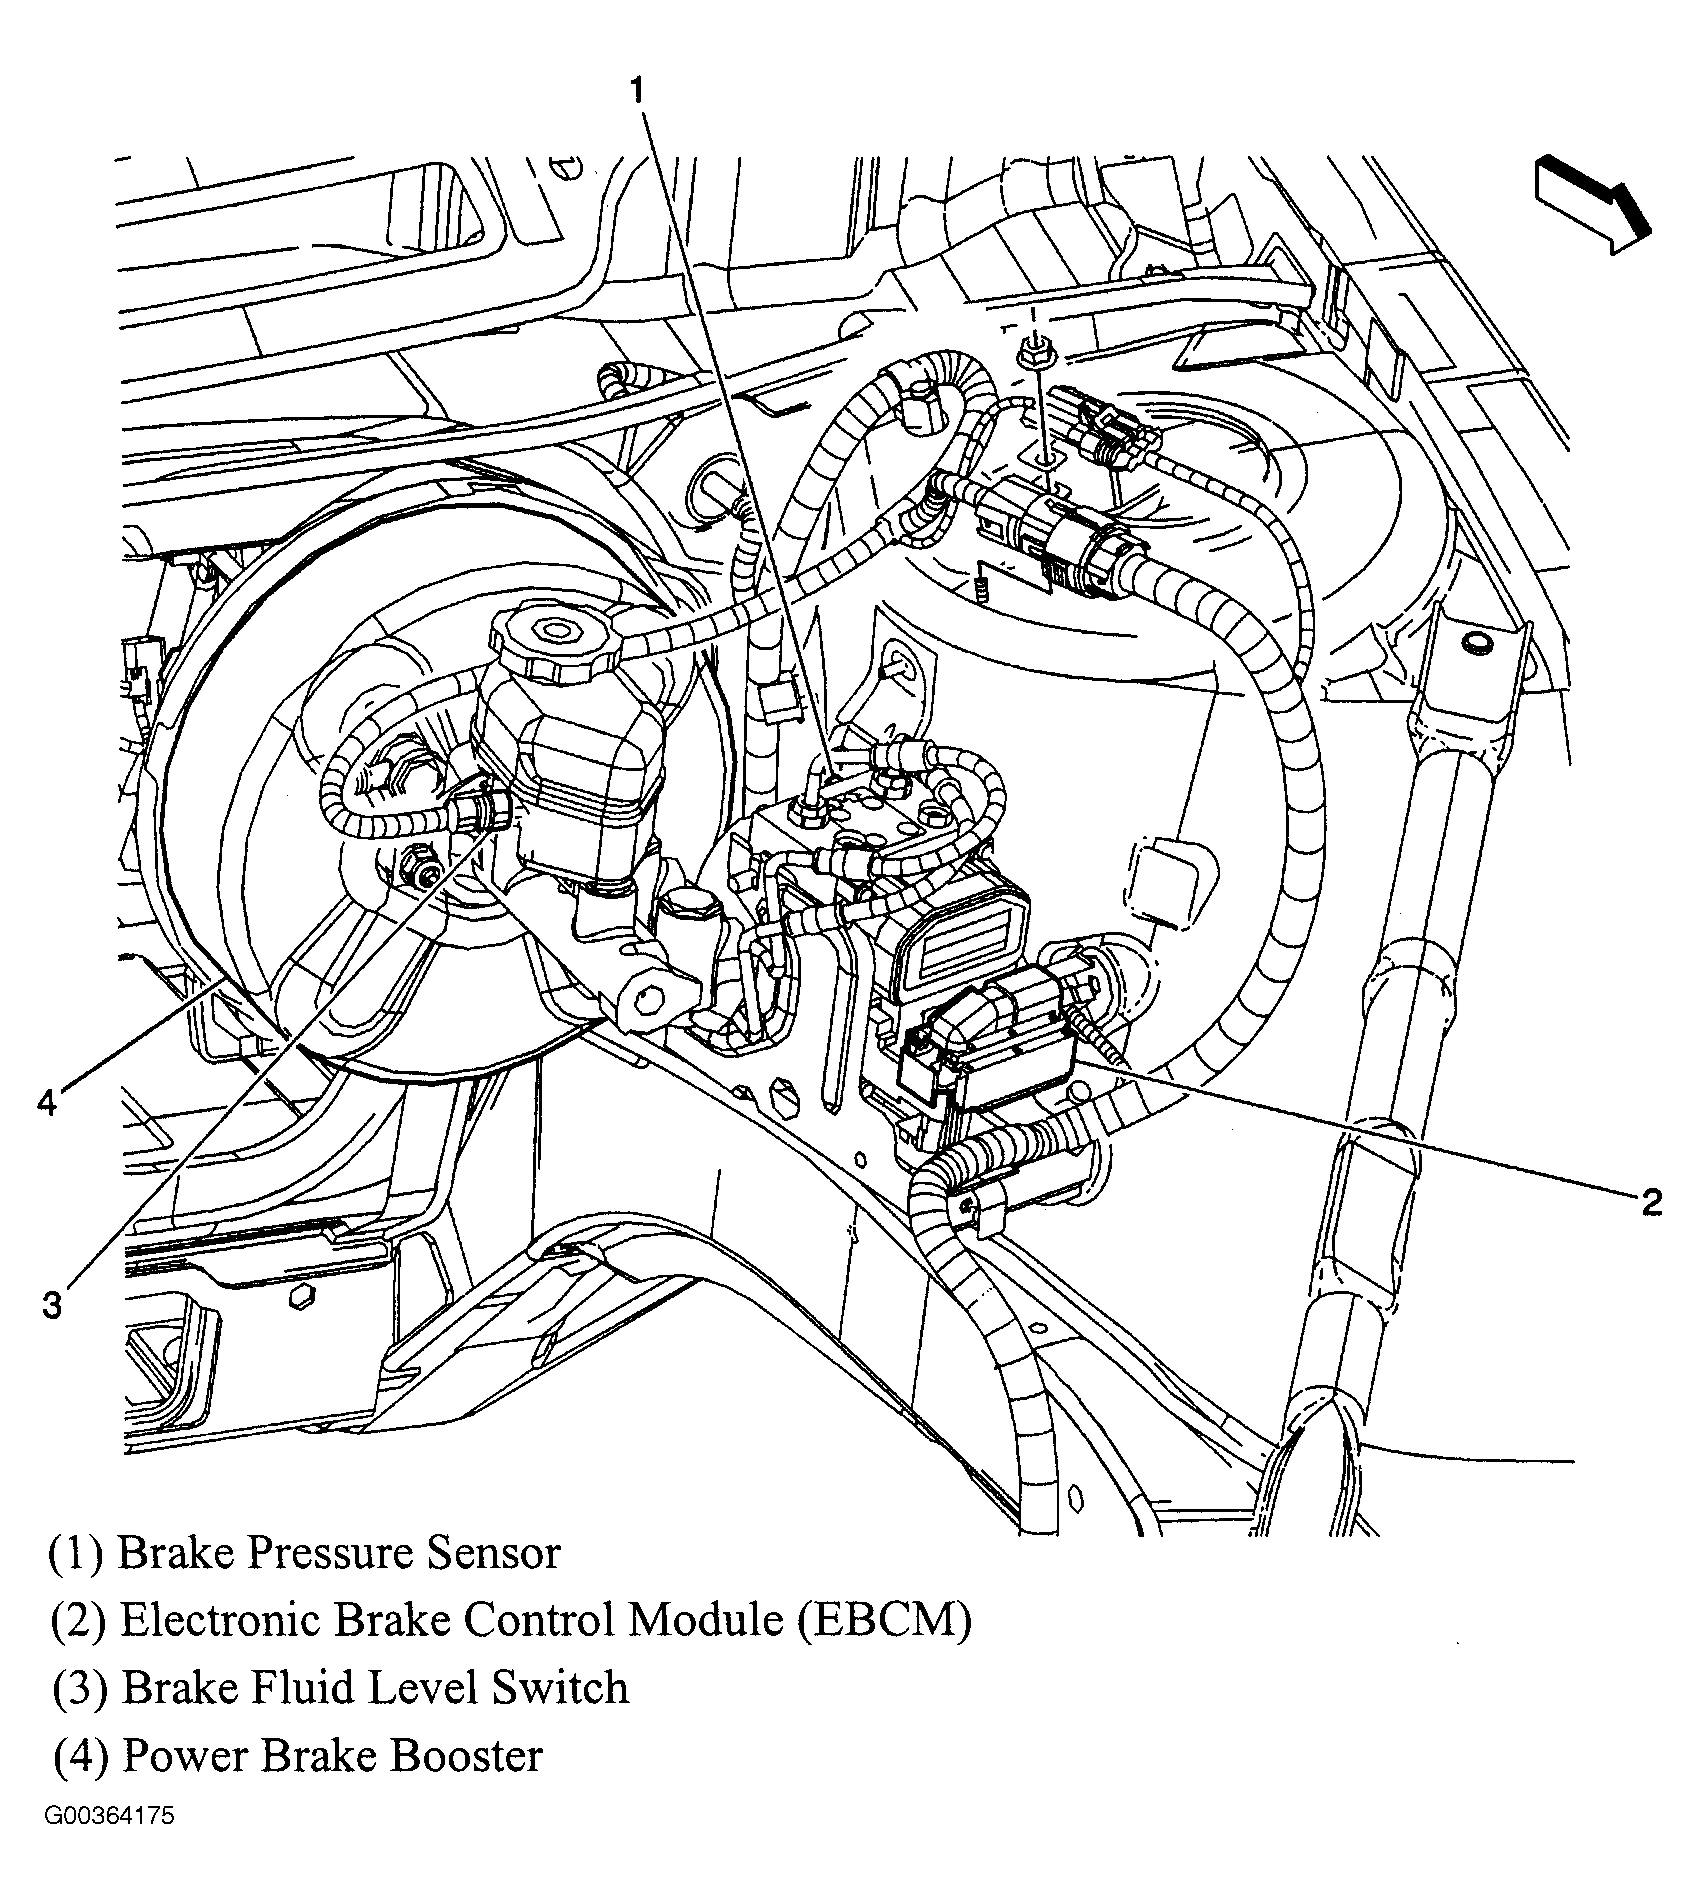 Buick LaCrosse CXS 2008 - Component Locations -  Left Rear Of Engine Compartment